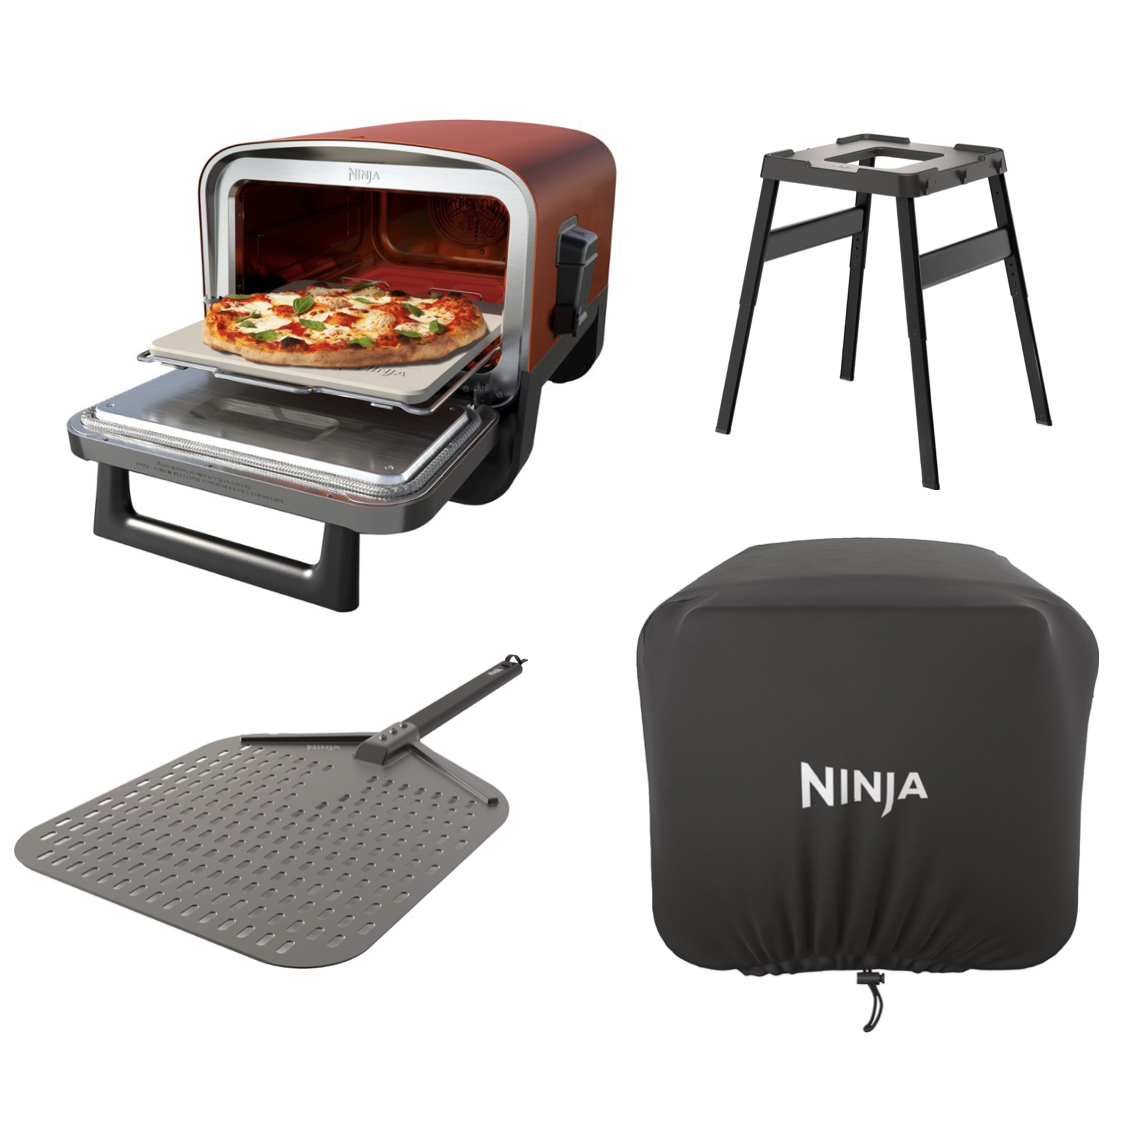 Ninja's Woodfire 8-in-1 Pizza Oven hits one of its best prices at $285  shipped ($115 off)